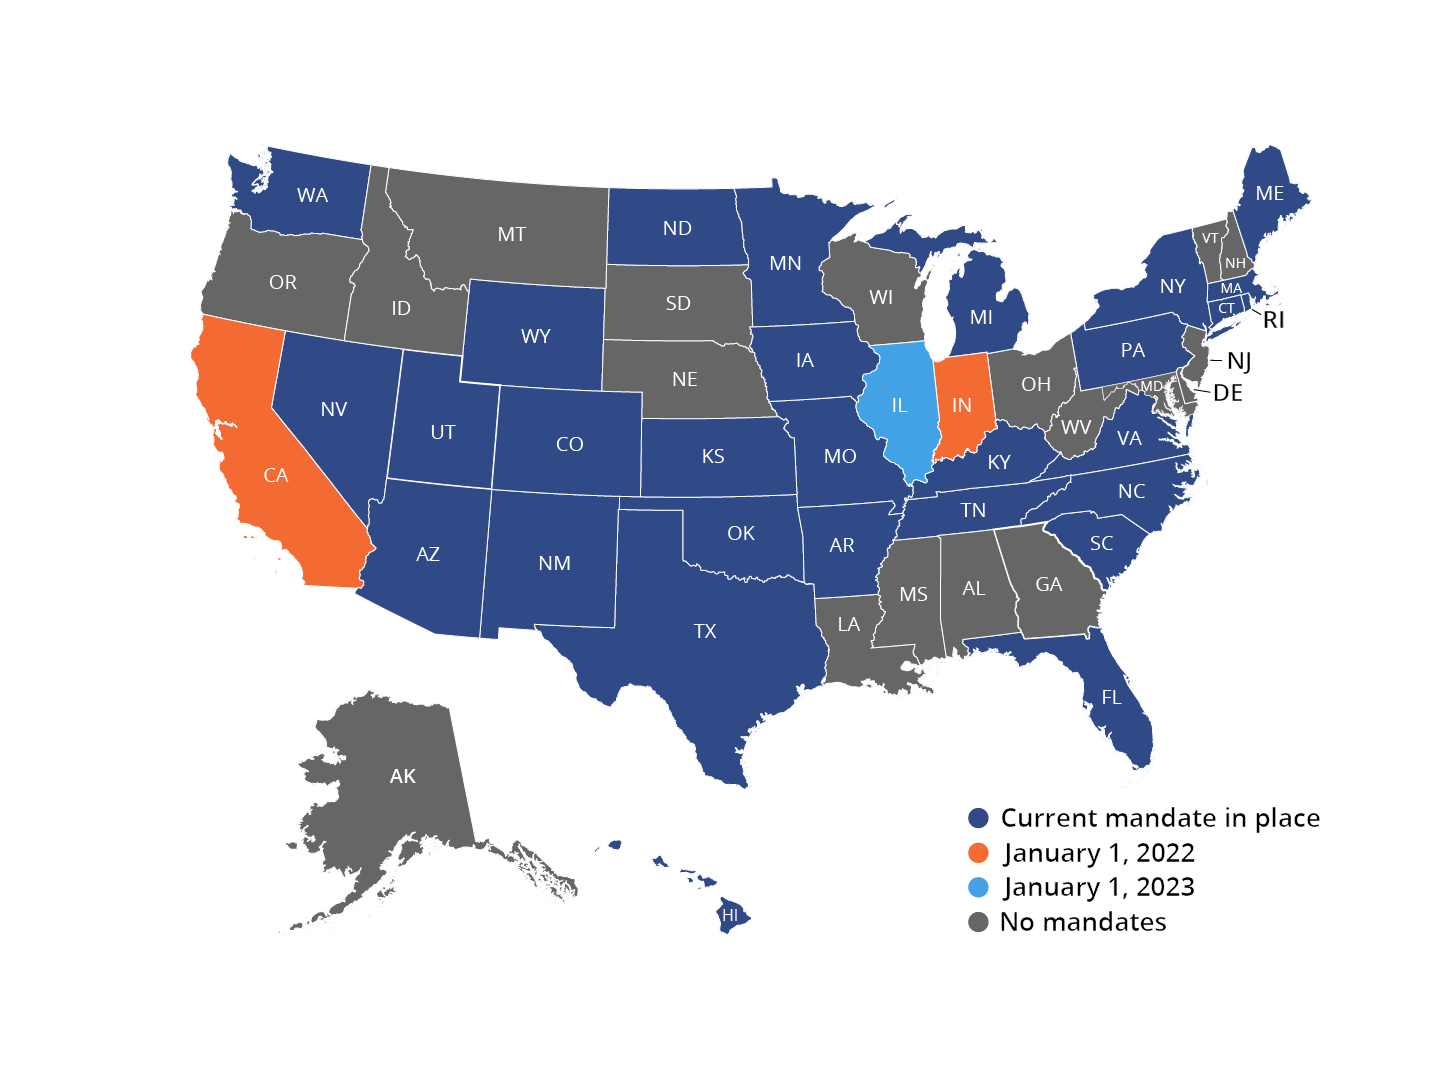 Figure: Map of United States with each state marked to show its EPCS requirements